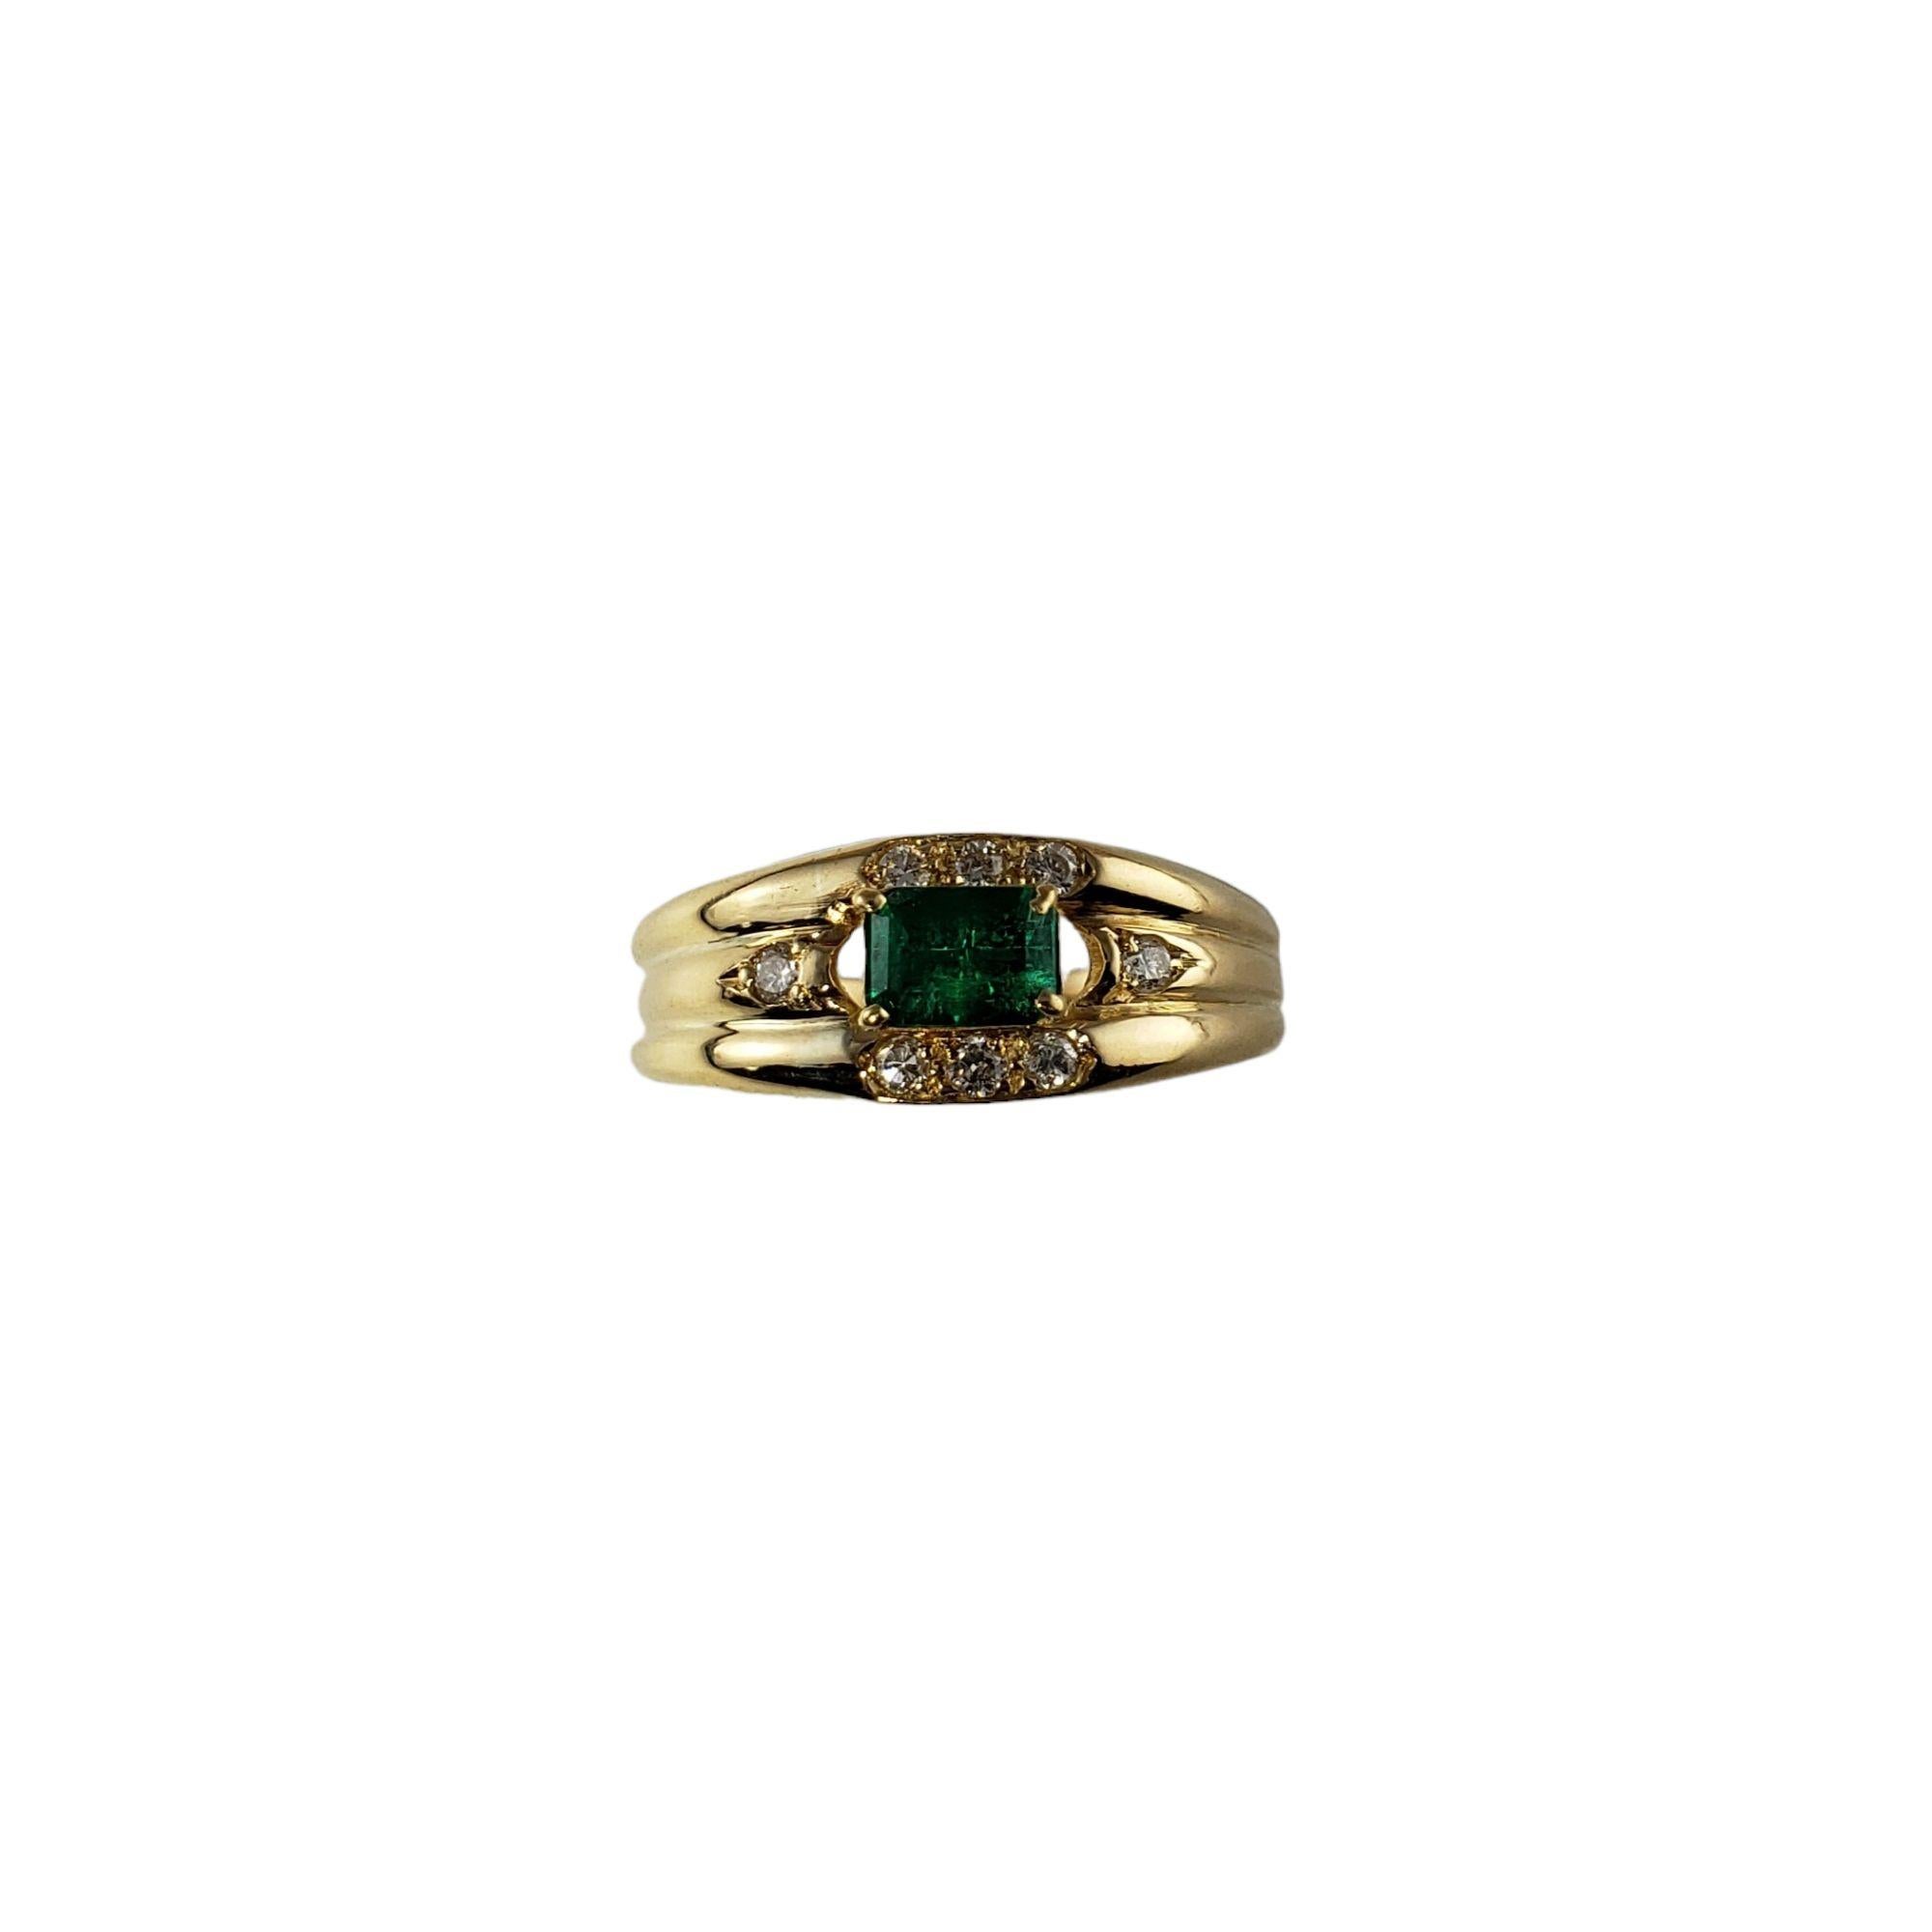 Vintage 14 Karat Yellow Gold Emerald and Diamond Ring Size 6.5-6.75

This elegant ring features one emerald gemstone (6 mm x 4 mm) and eight round brilliant cut diamonds set in classic 14K yellow gold. Width: 8 mm. Shank: 2.5 mm.

Approximate total